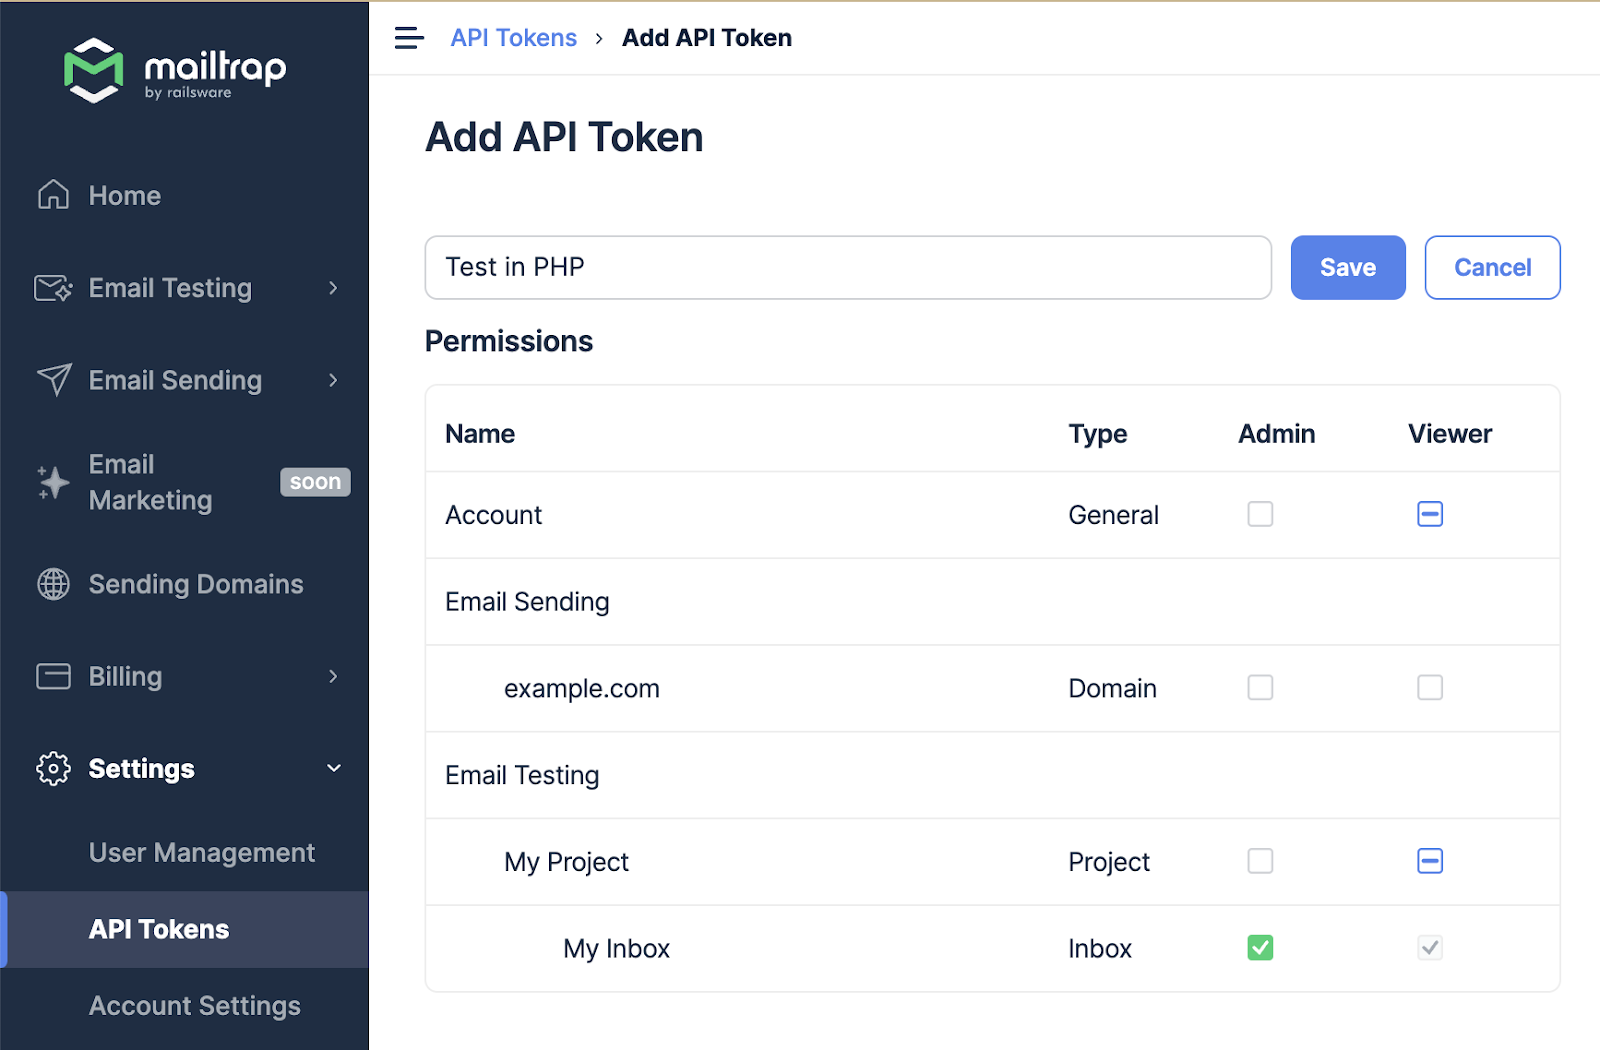 Creating an API token for the Email Testing inbox 